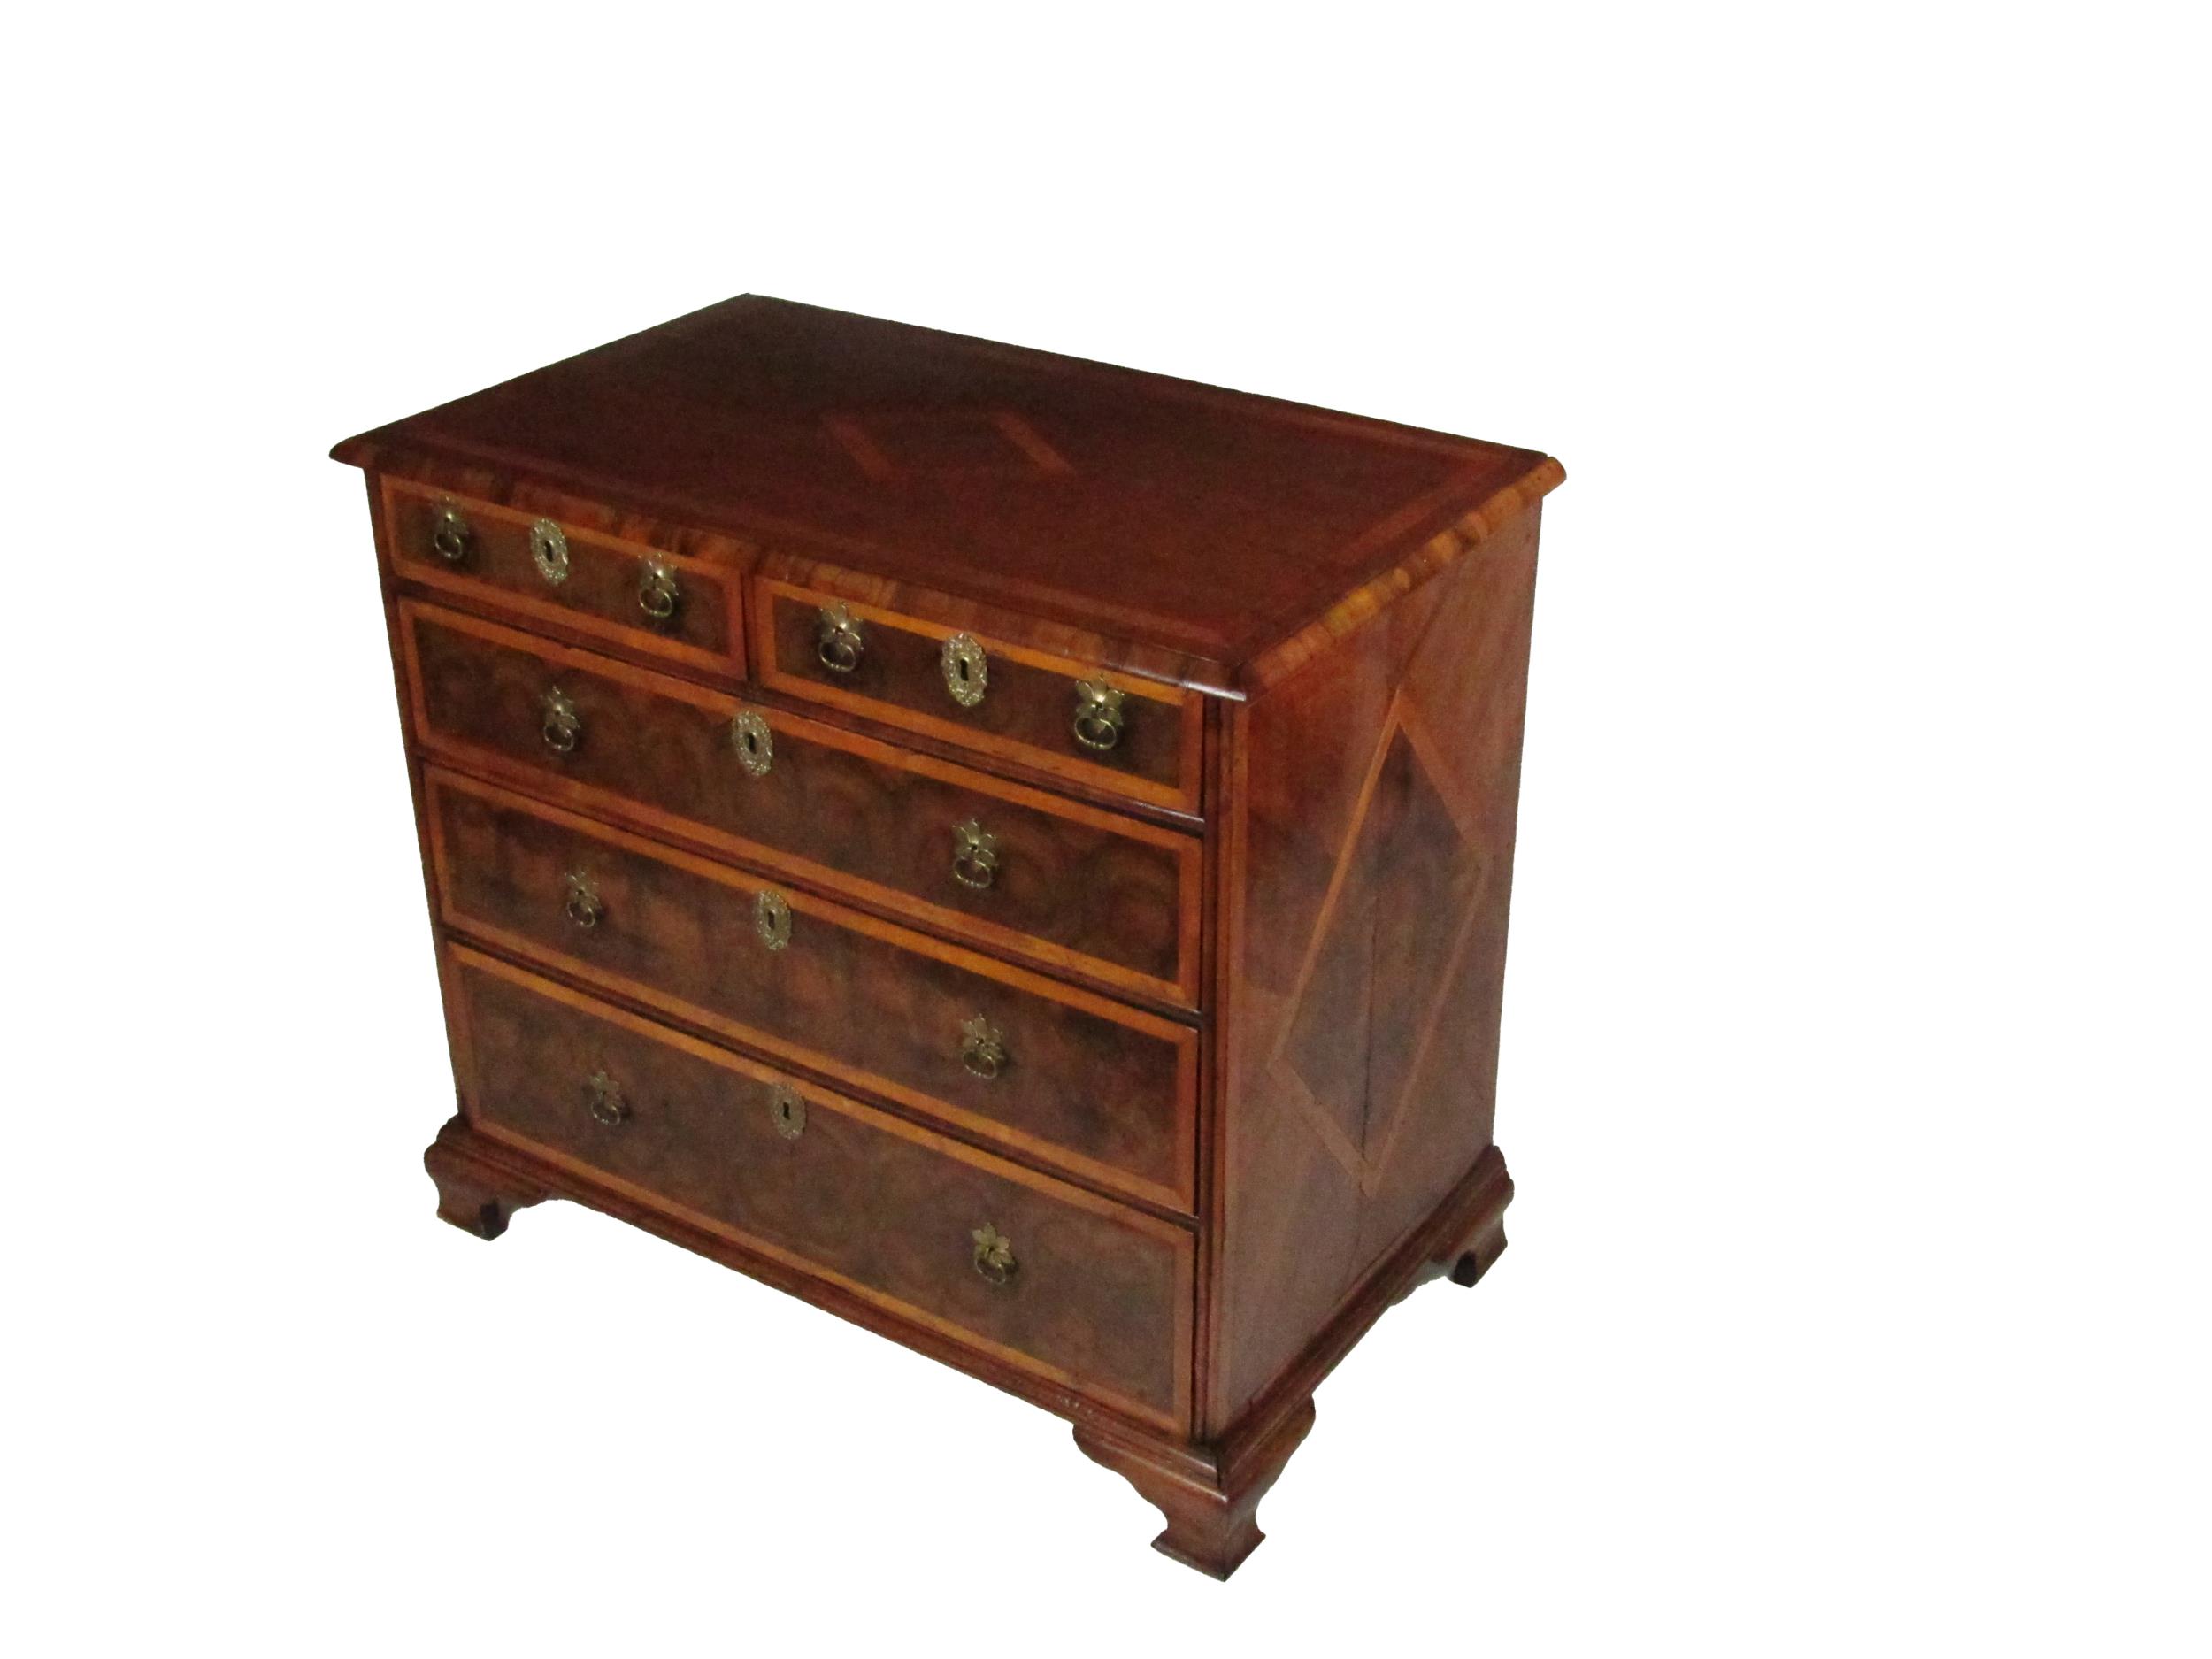 An attractive 18th Century English walnut oyster veneer Chest of Drawers, the moulded top with